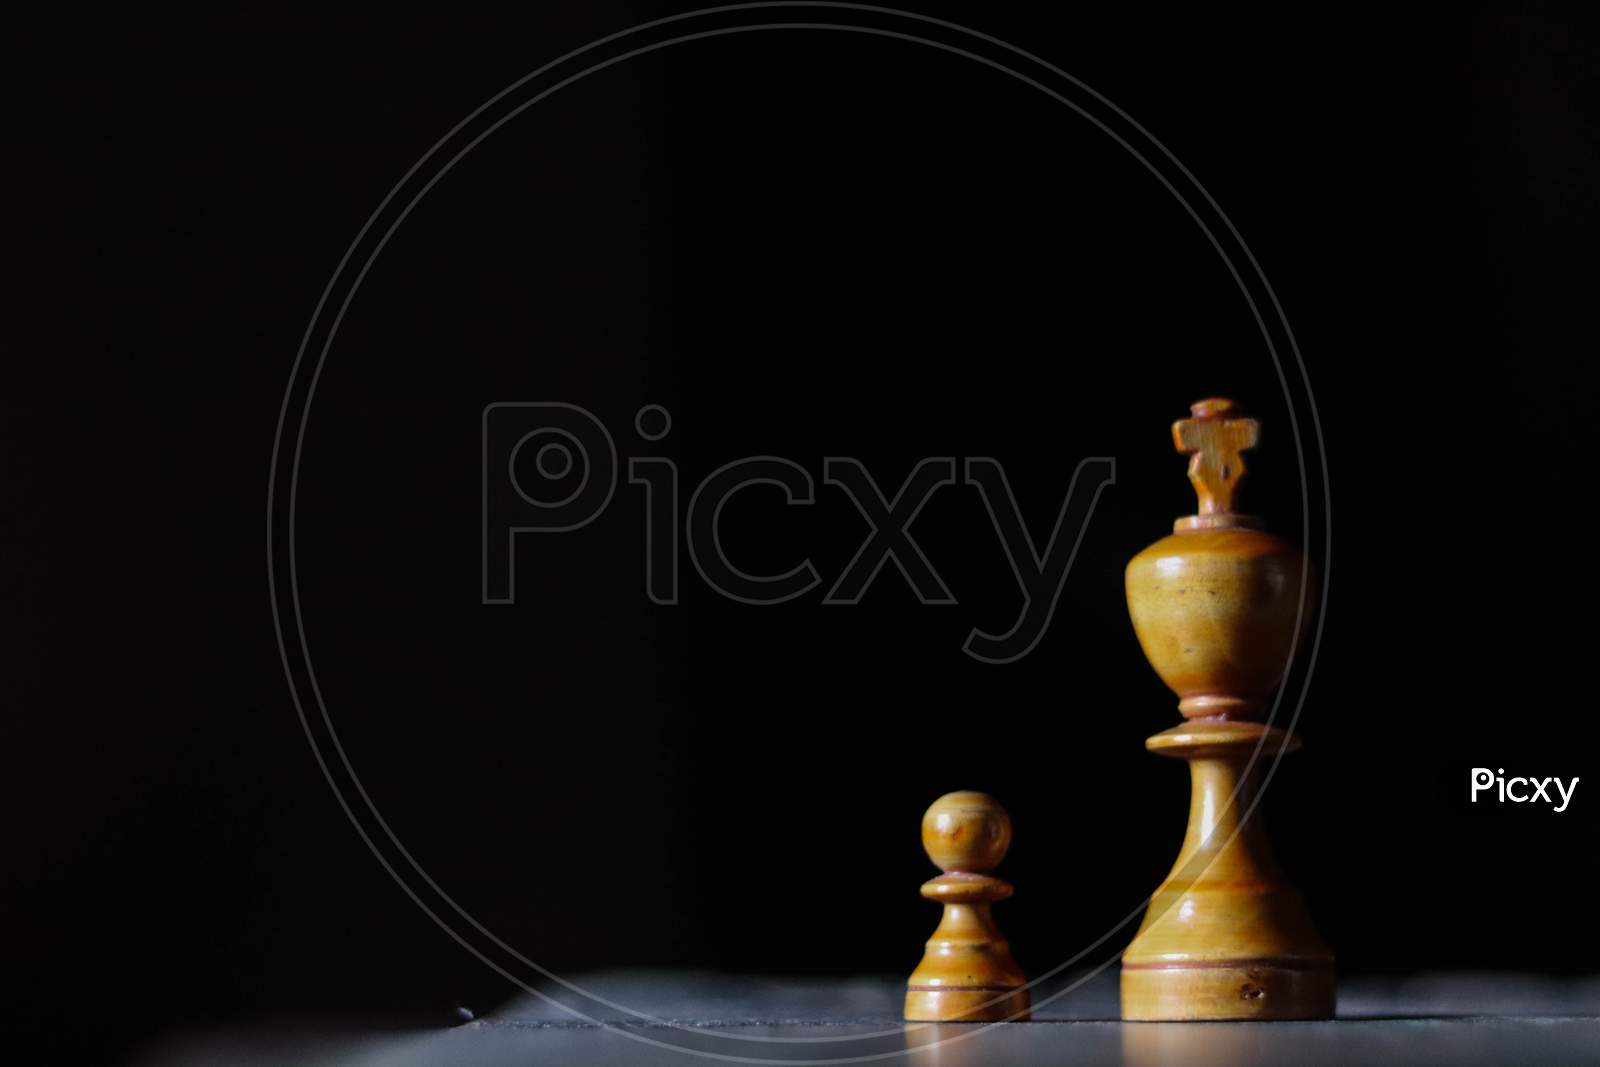 King & pawn on a chess board